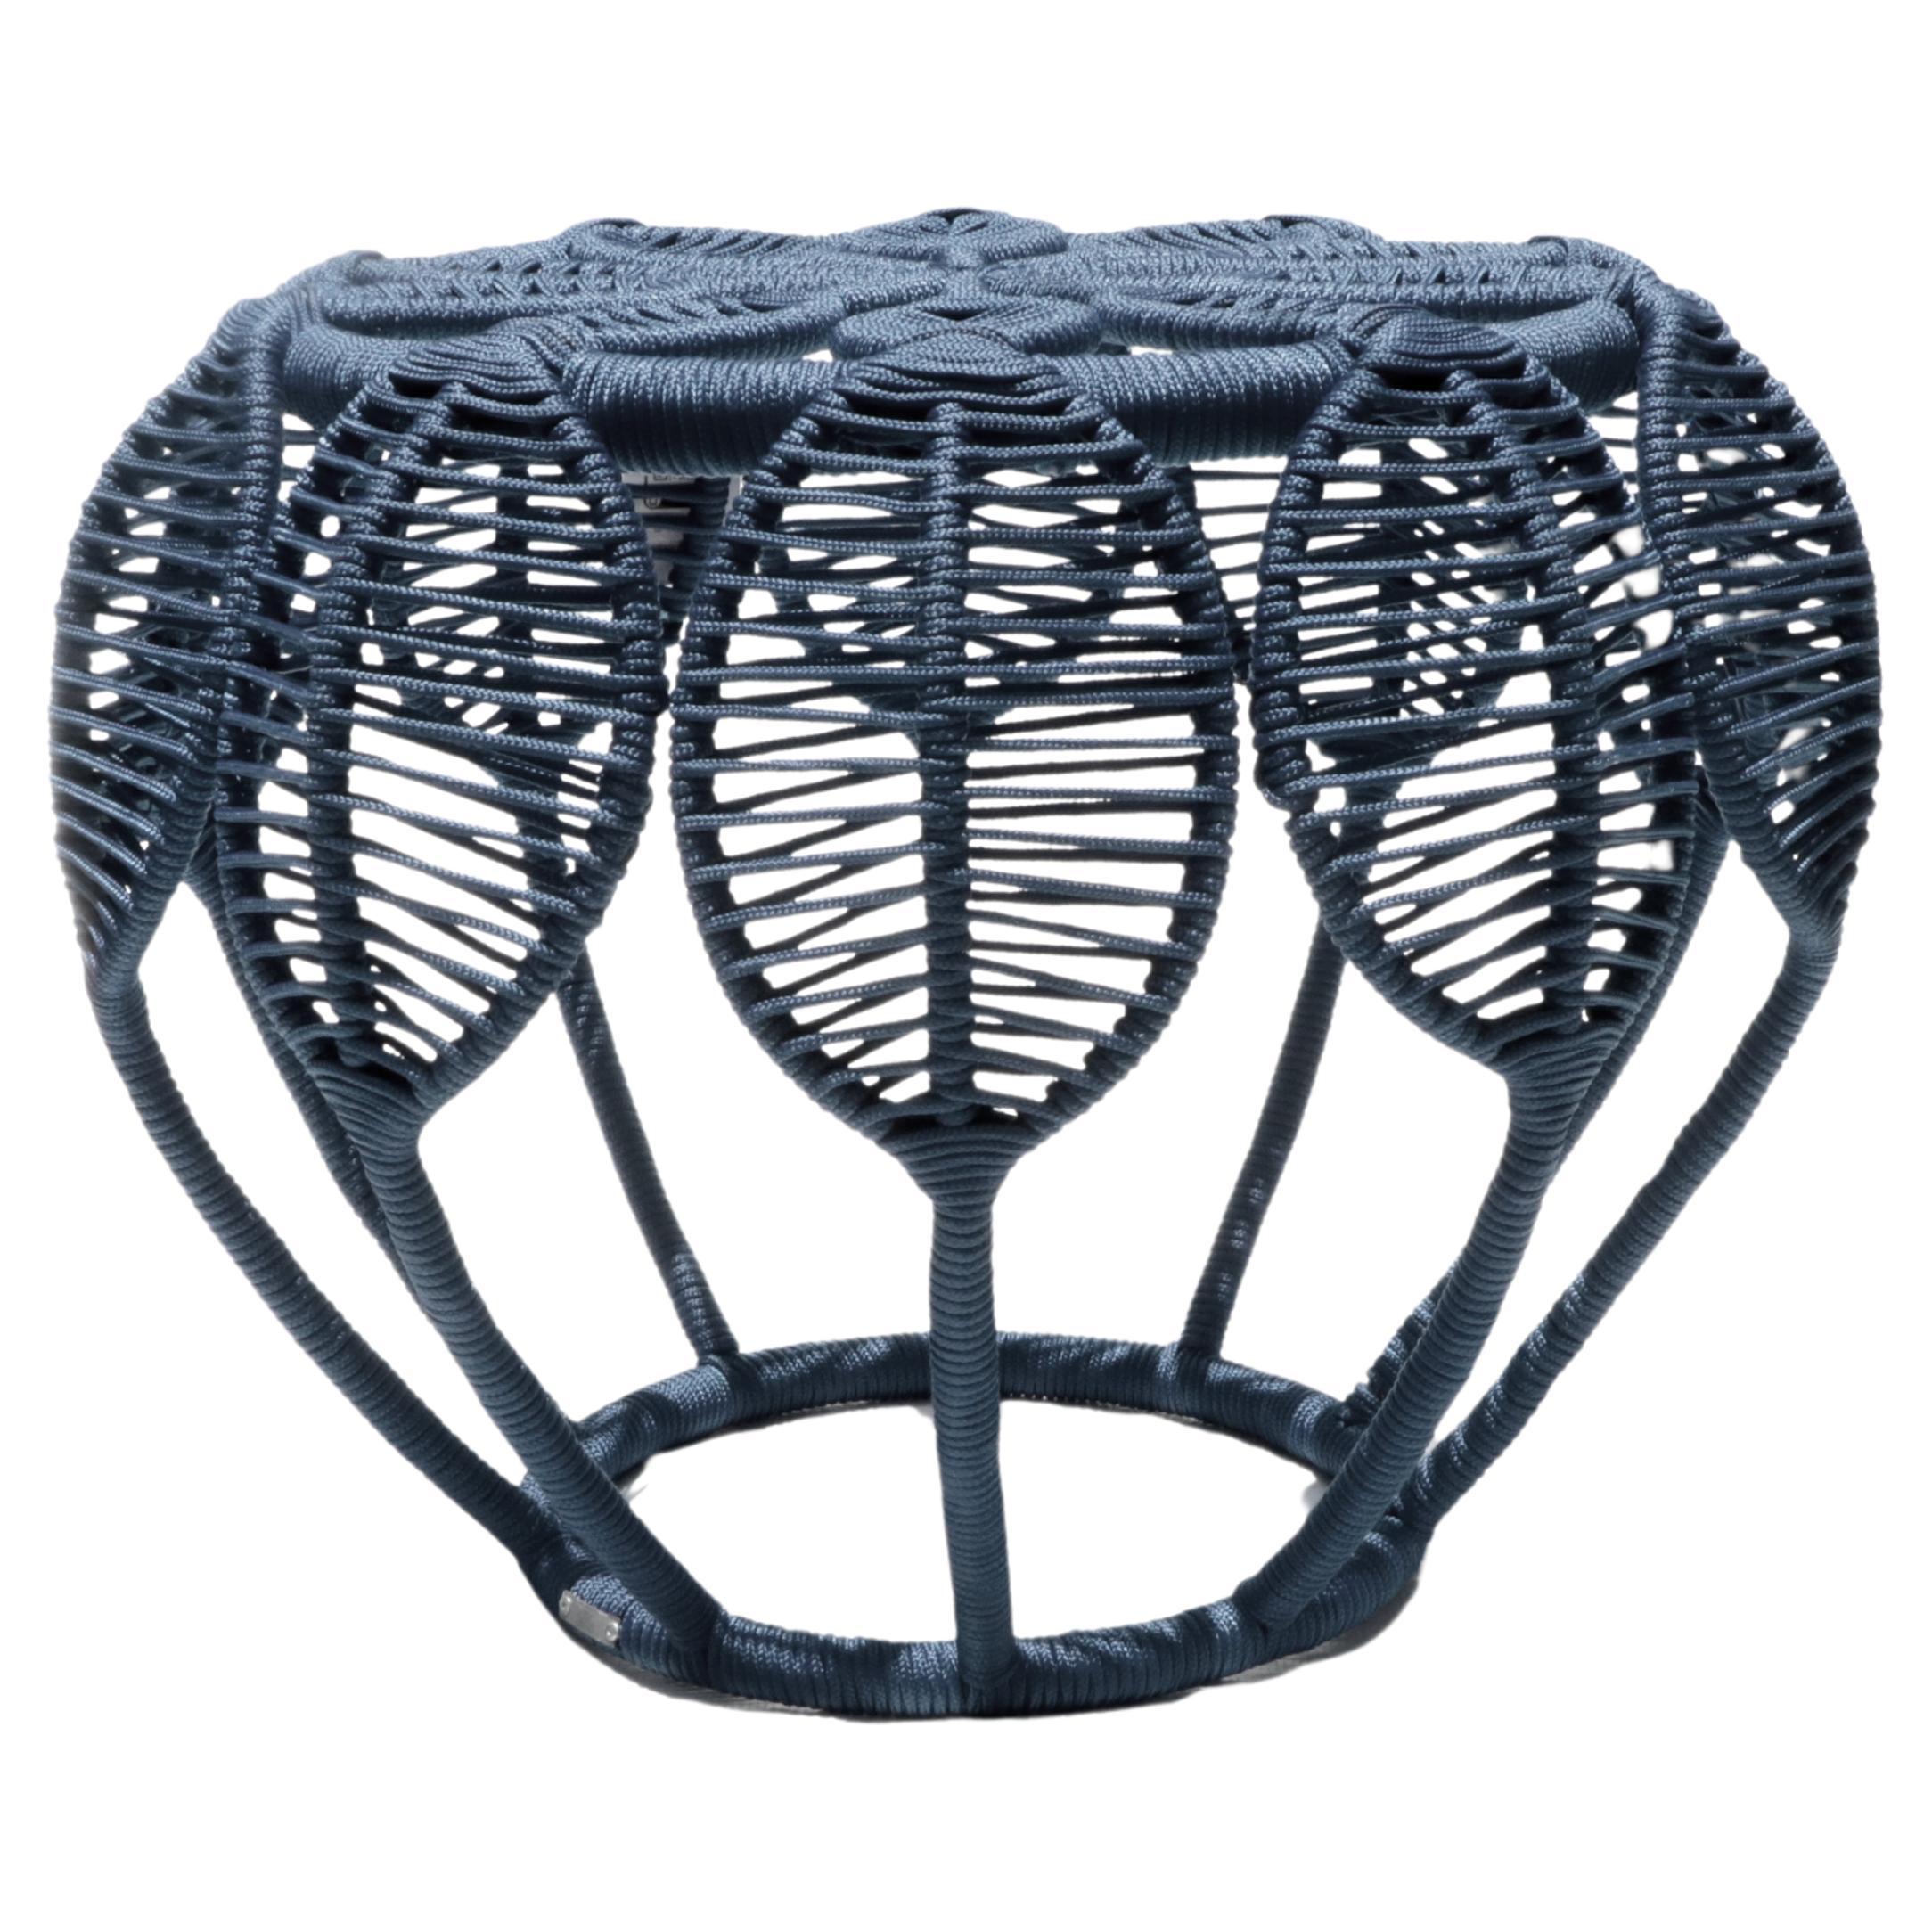 Ipê Stool - In navy blue For Sale